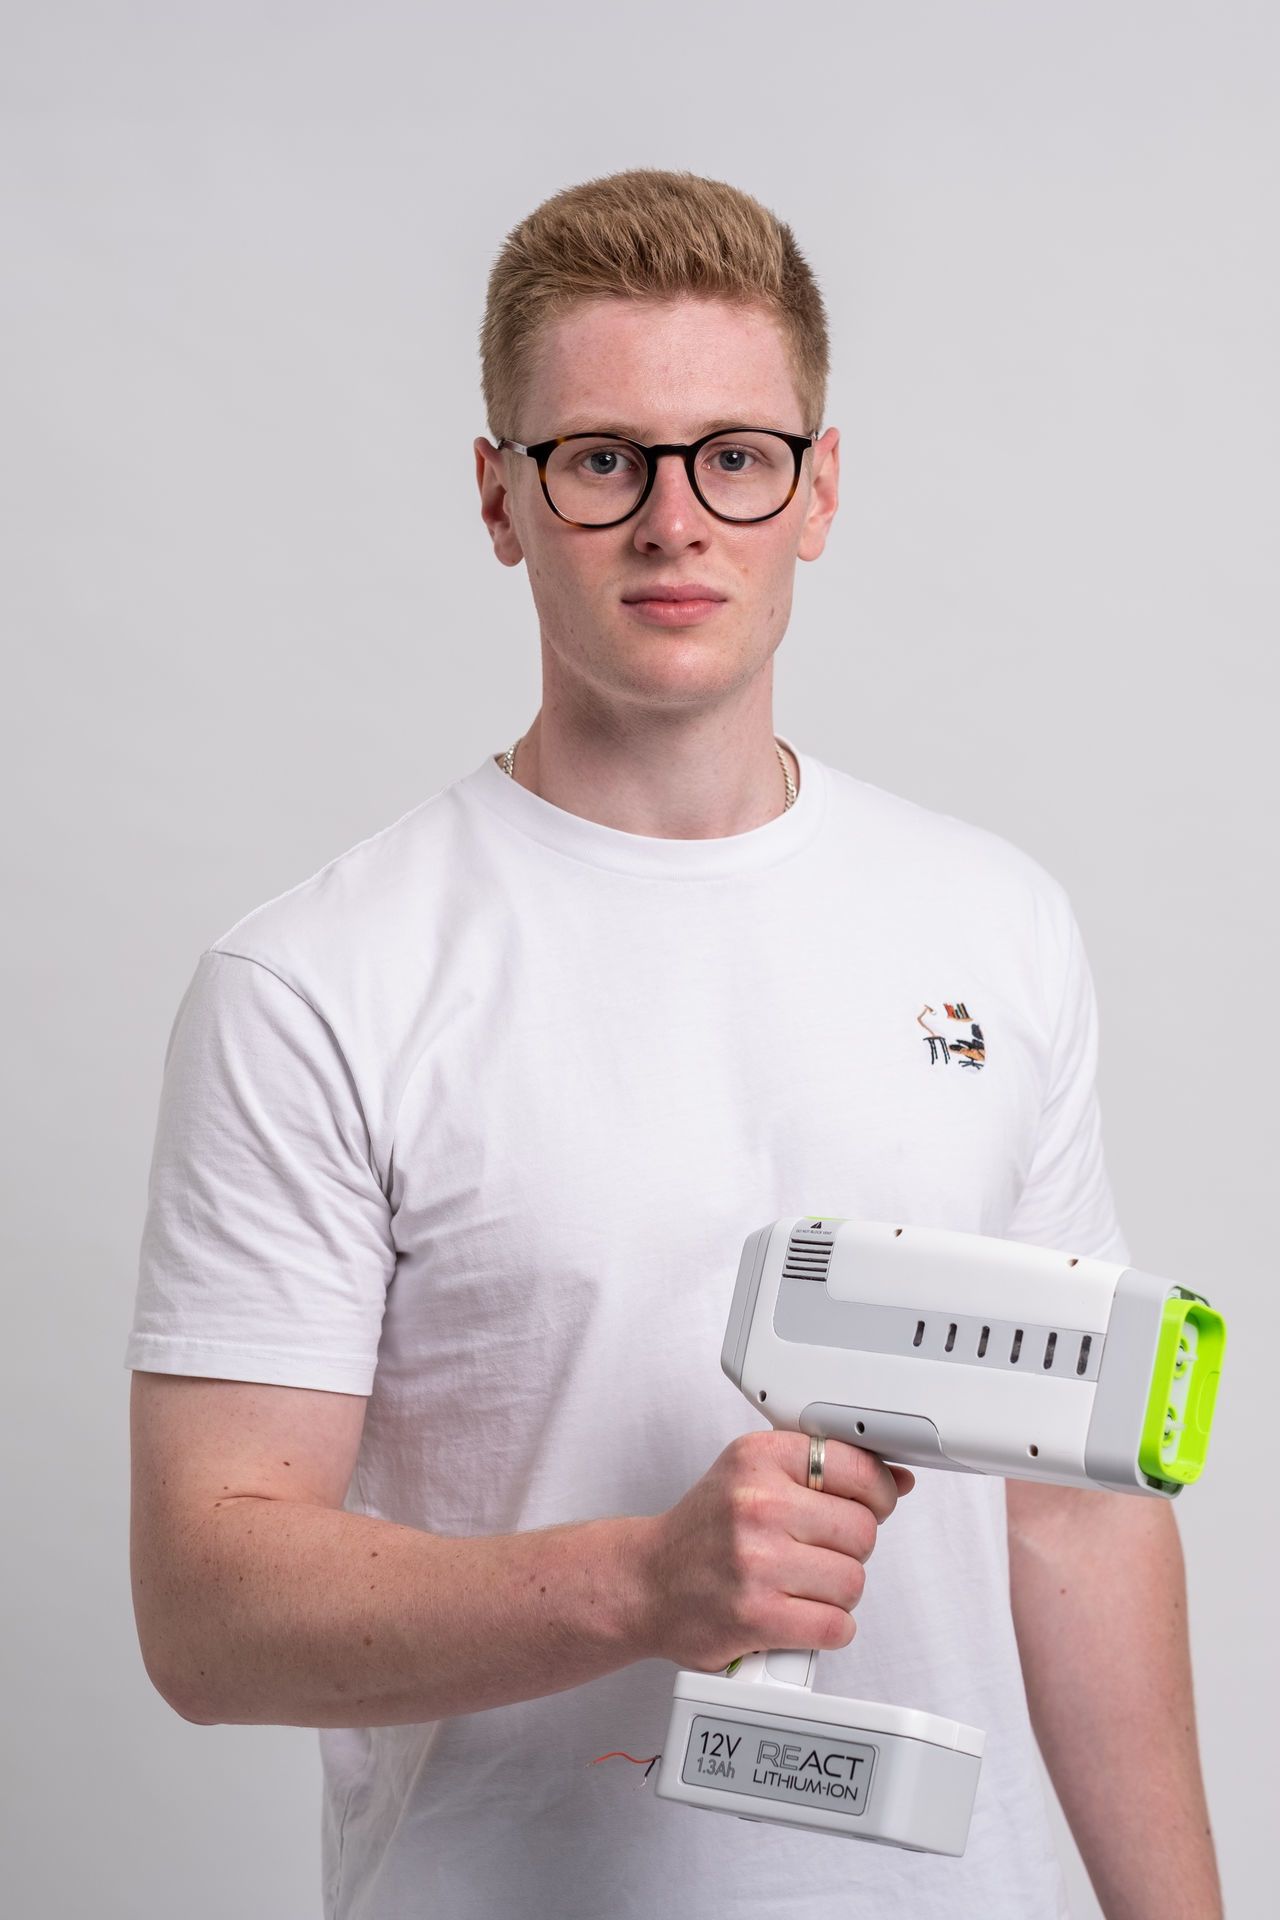 Joseph Bentley with his React device - Rapid Emergency Actuating Tamponade - which helps stem bleeding from knife wounds. 22-year-old.